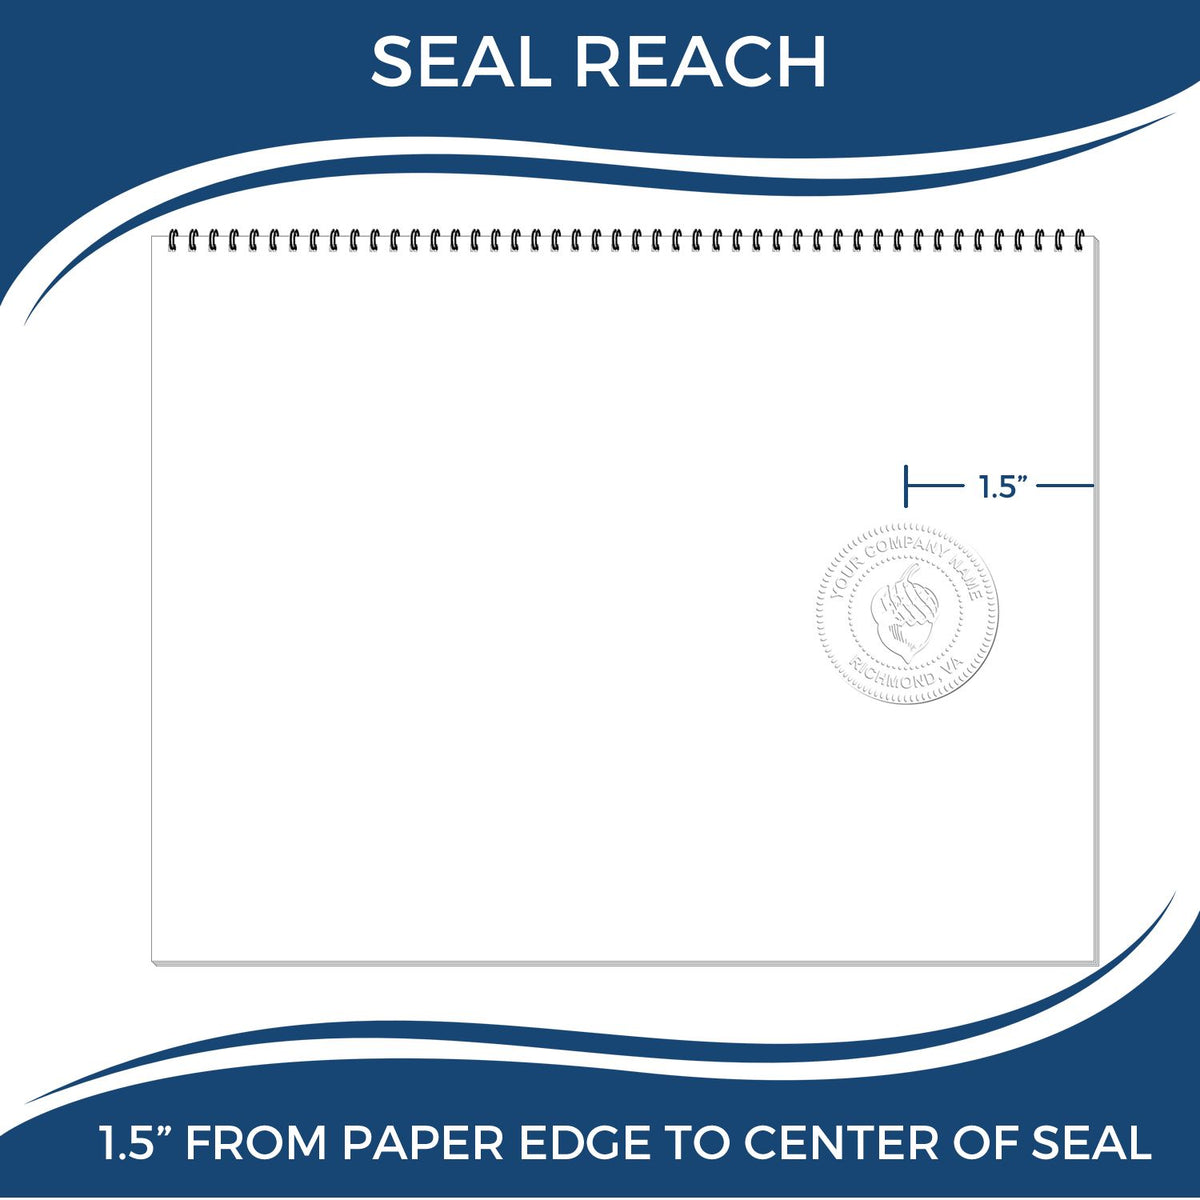 An infographic showing the seal reach which is represented by a ruler and a miniature seal image of the Gift Arizona Landscape Architect Seal